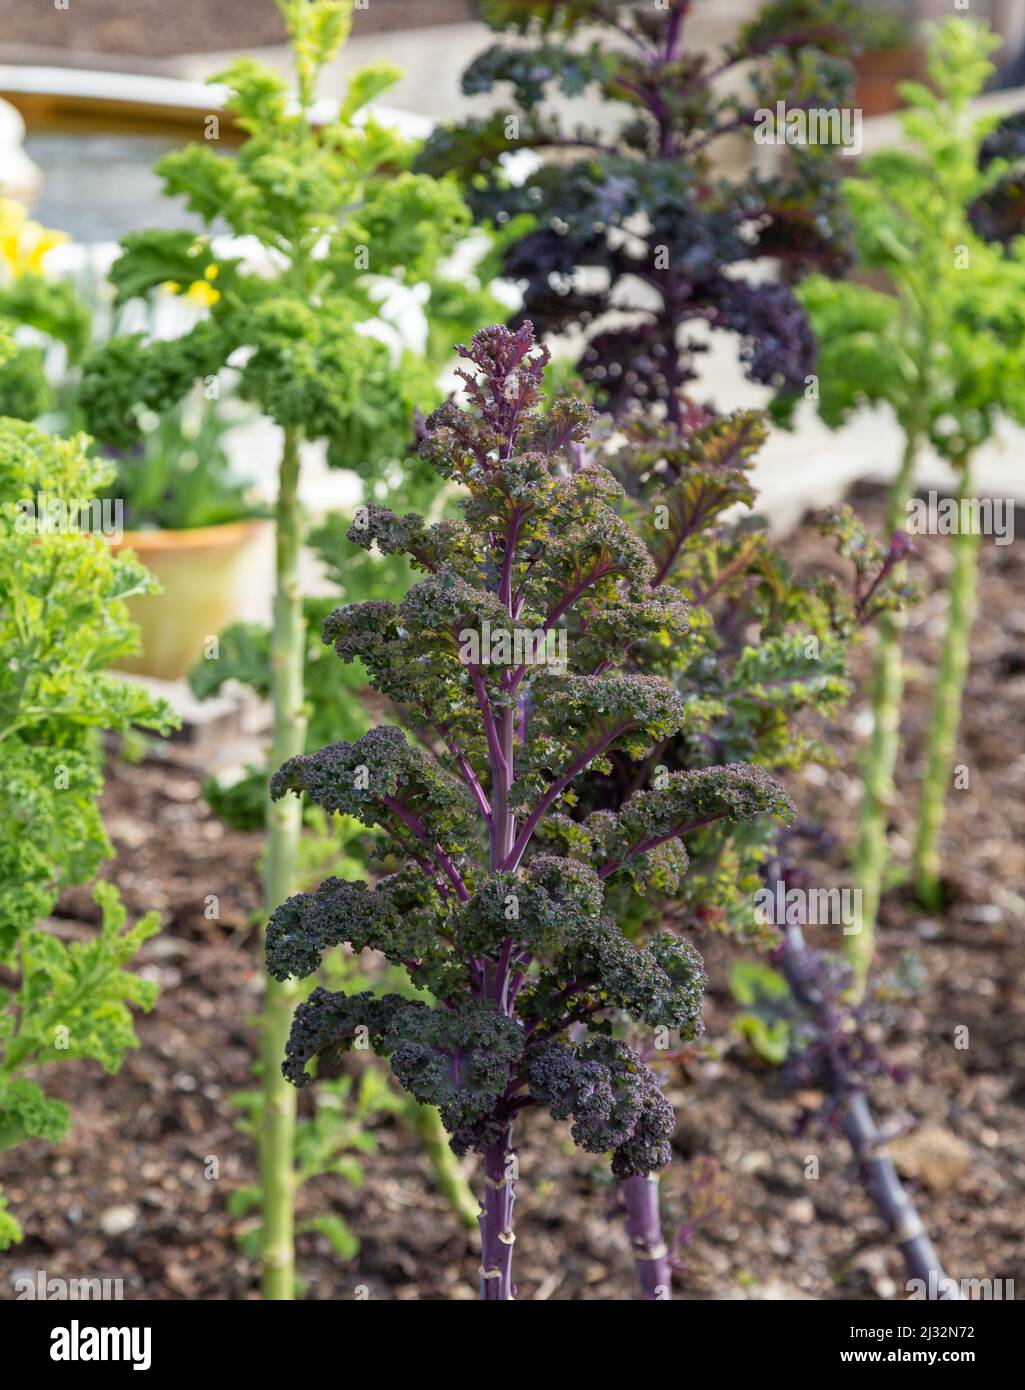 Green and Purple Curly Kale growing in a vegetable garden. Stock Photo